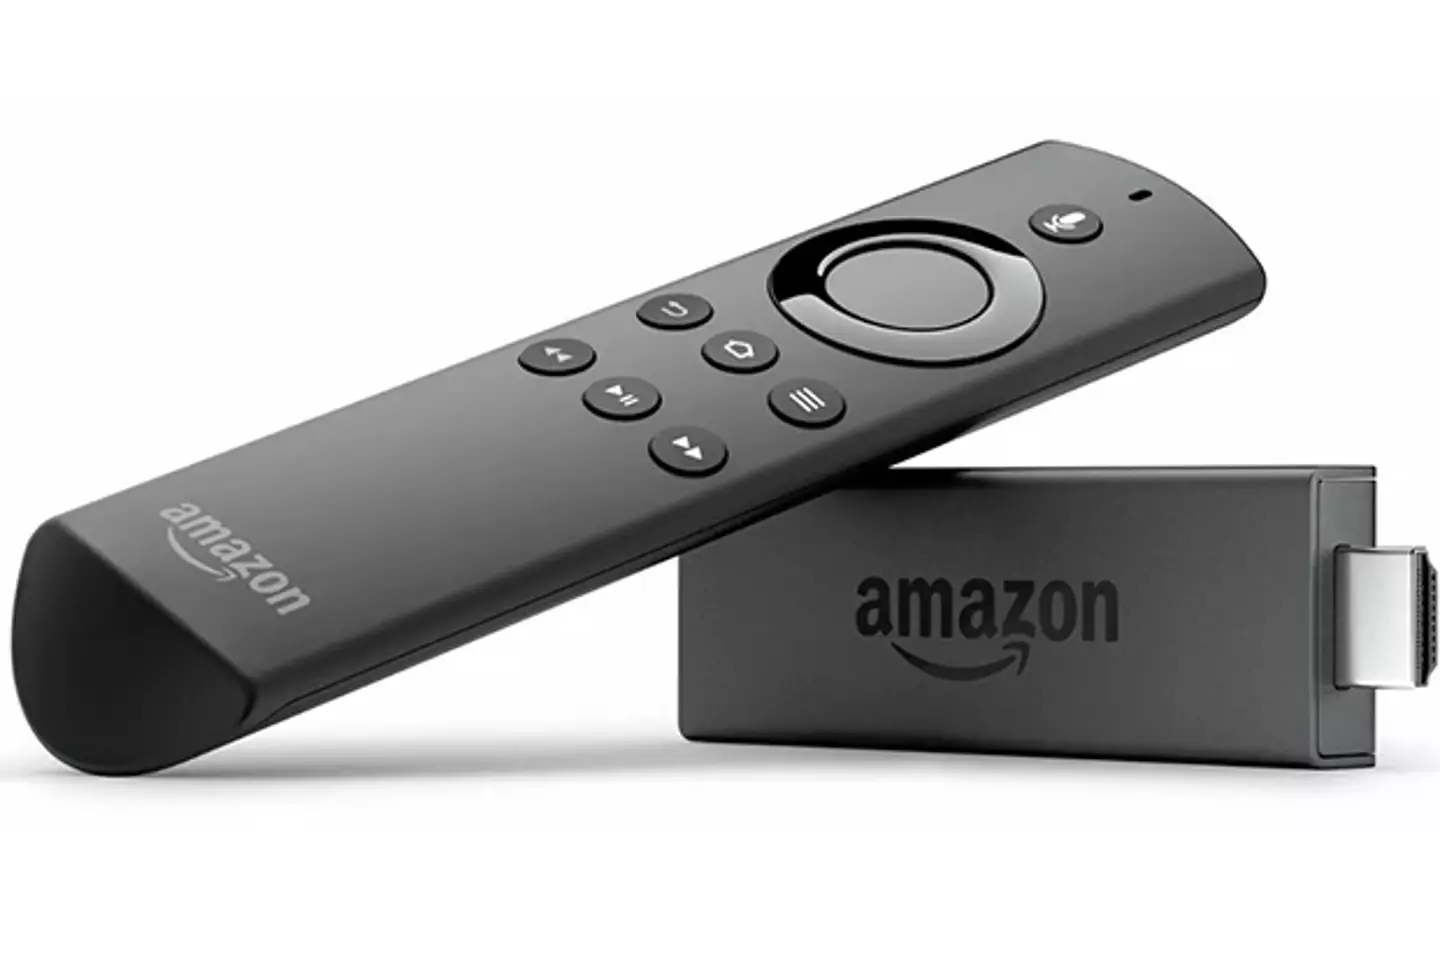 A 'jailbroken' Amazon Fire Stick is one of the more popular devices people use to illegally watch TV.